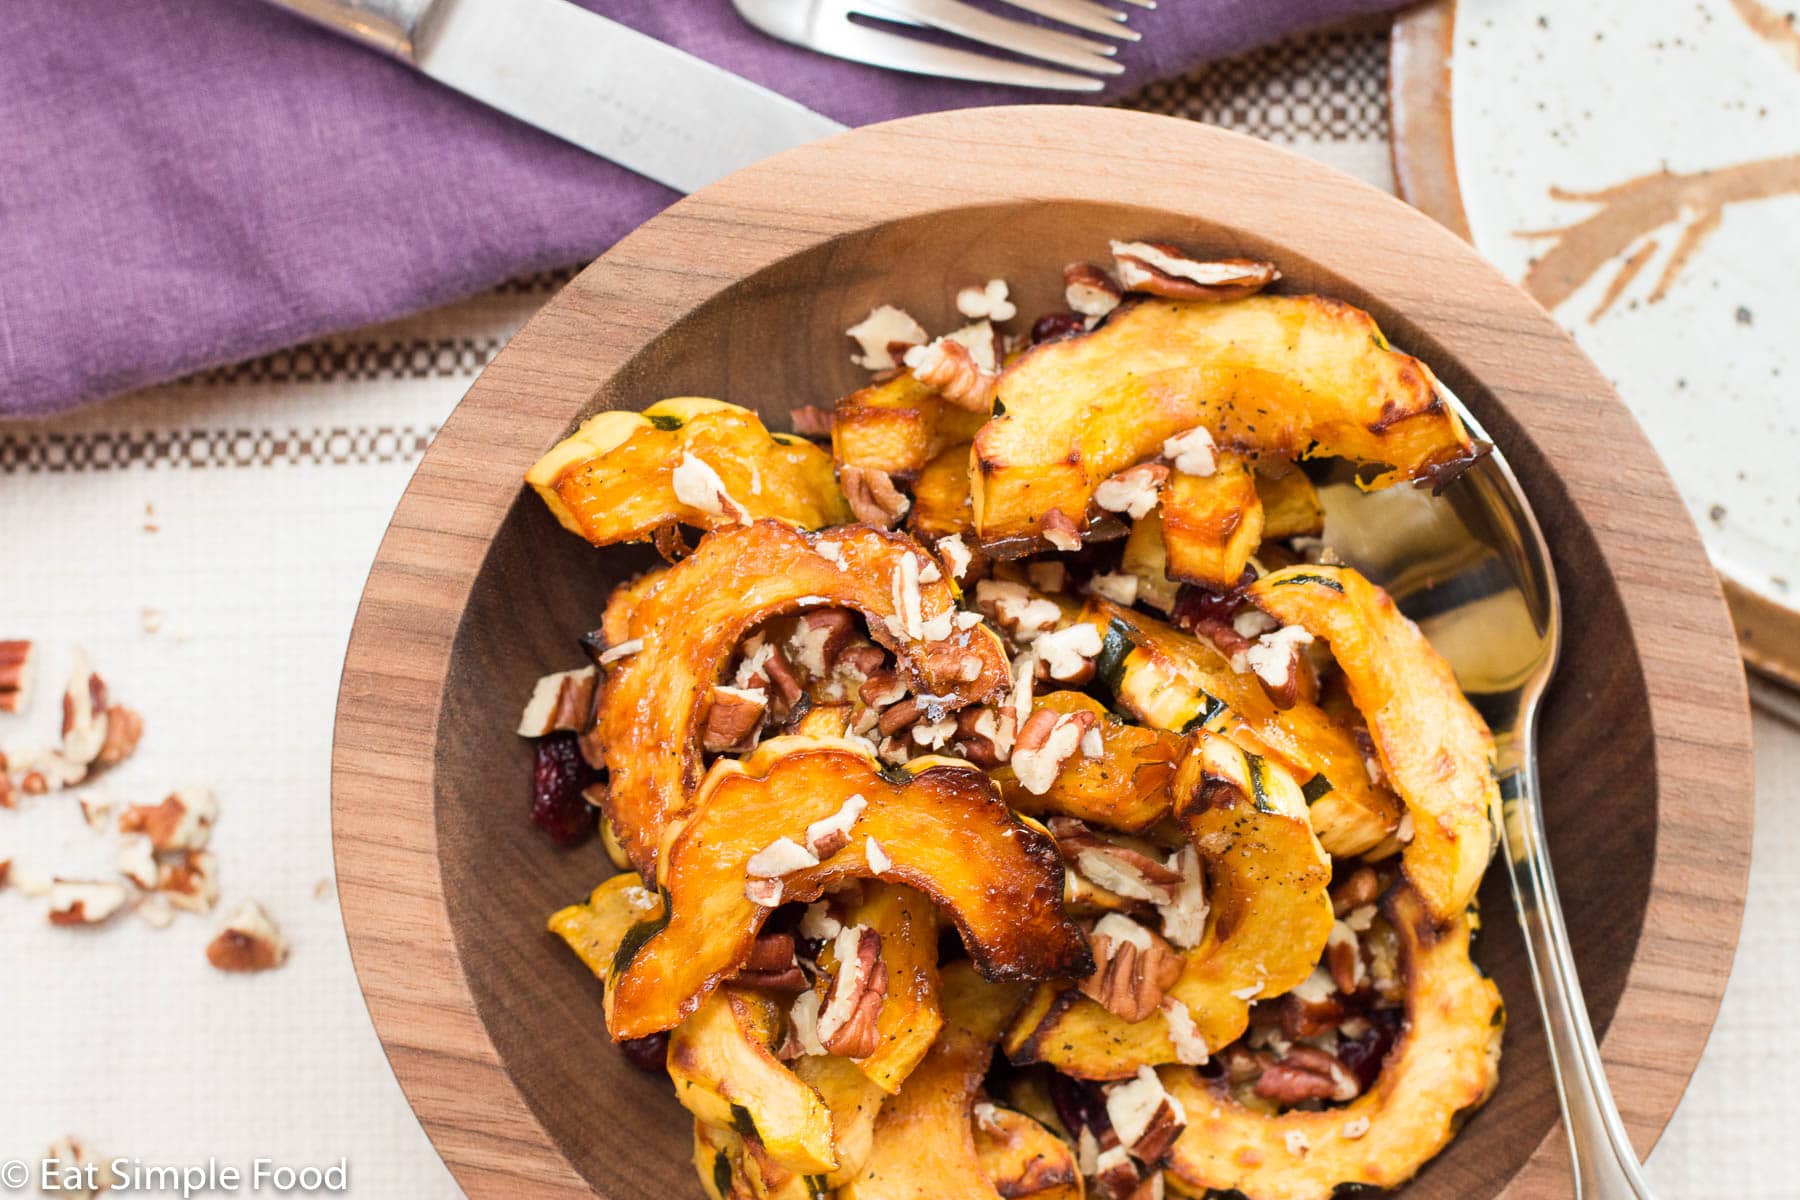 Top View Browned half moons of delicata squash with cranberries and pecans in a brown bowl.